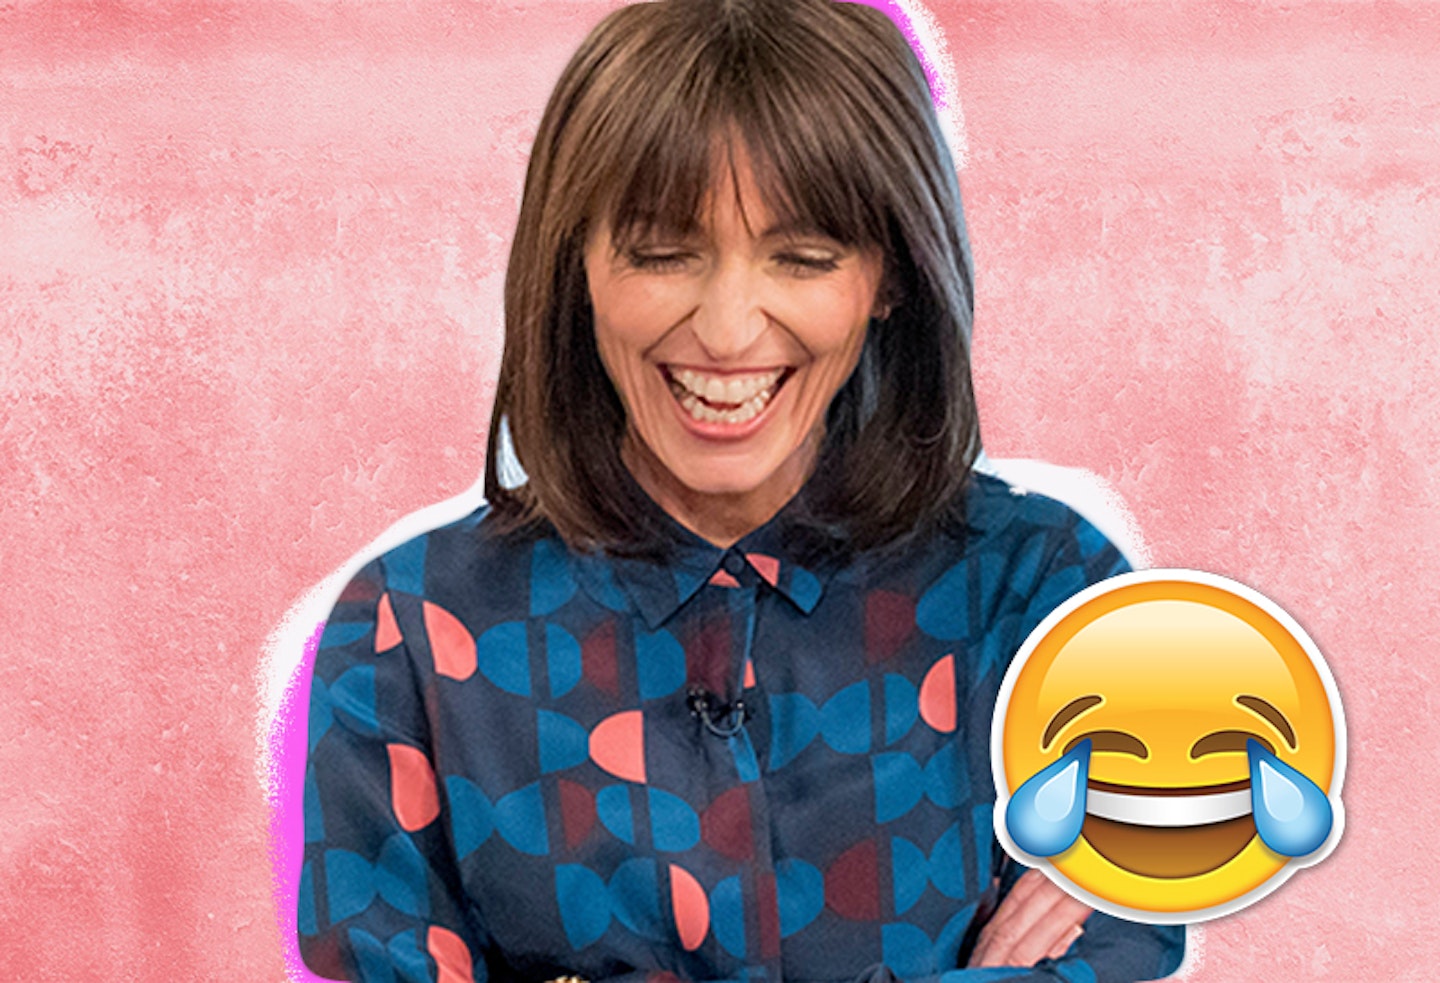 Davina McCall’s shocking confession about her own labour experience